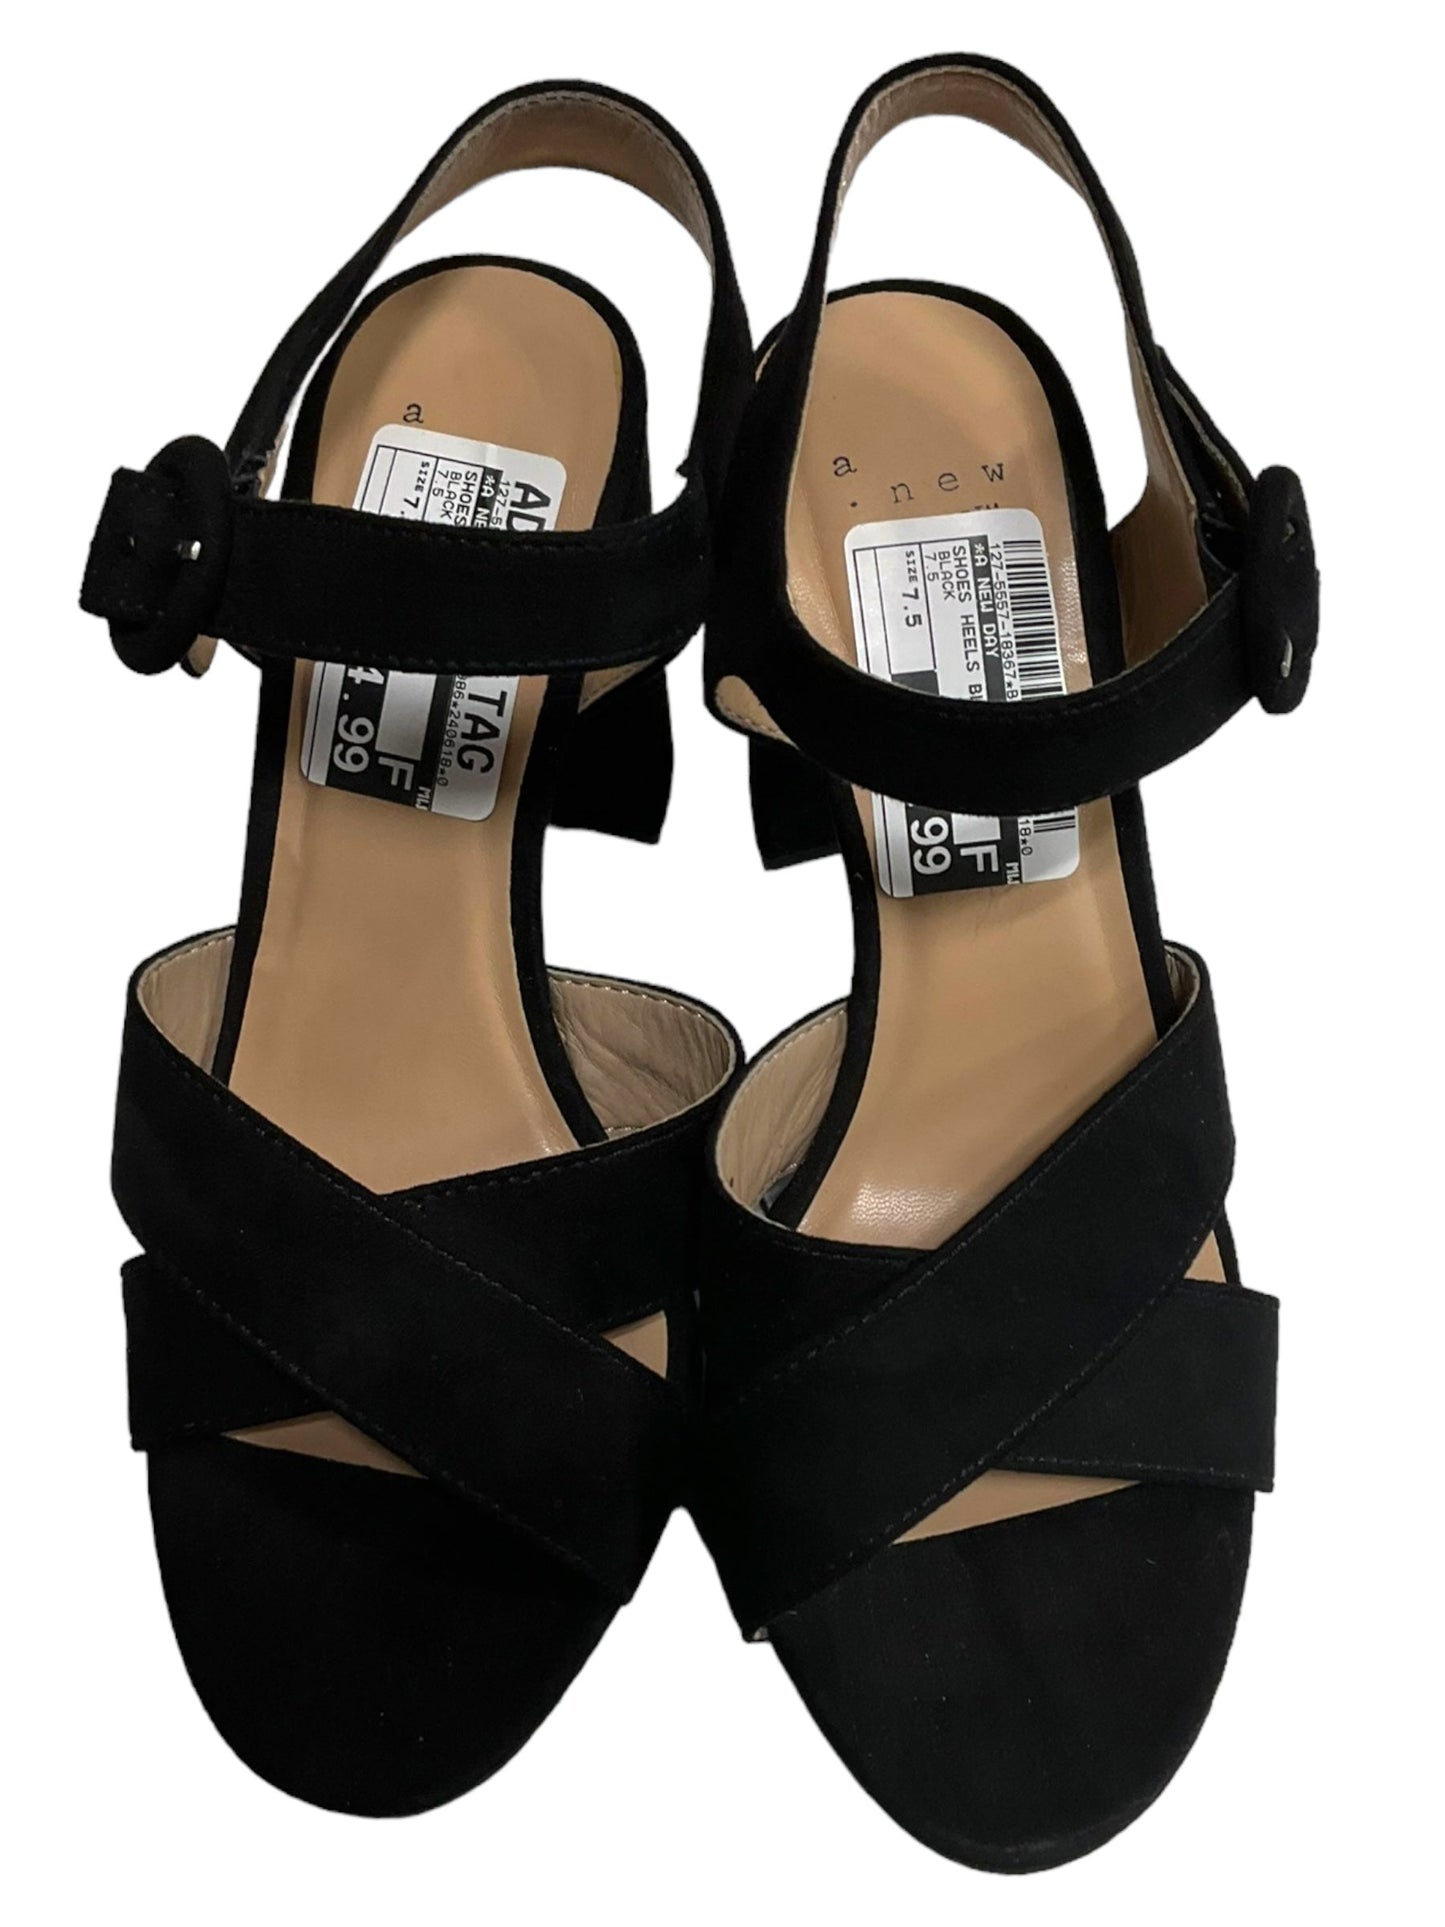 Black Shoes Heels Block A New Day, Size 7.5